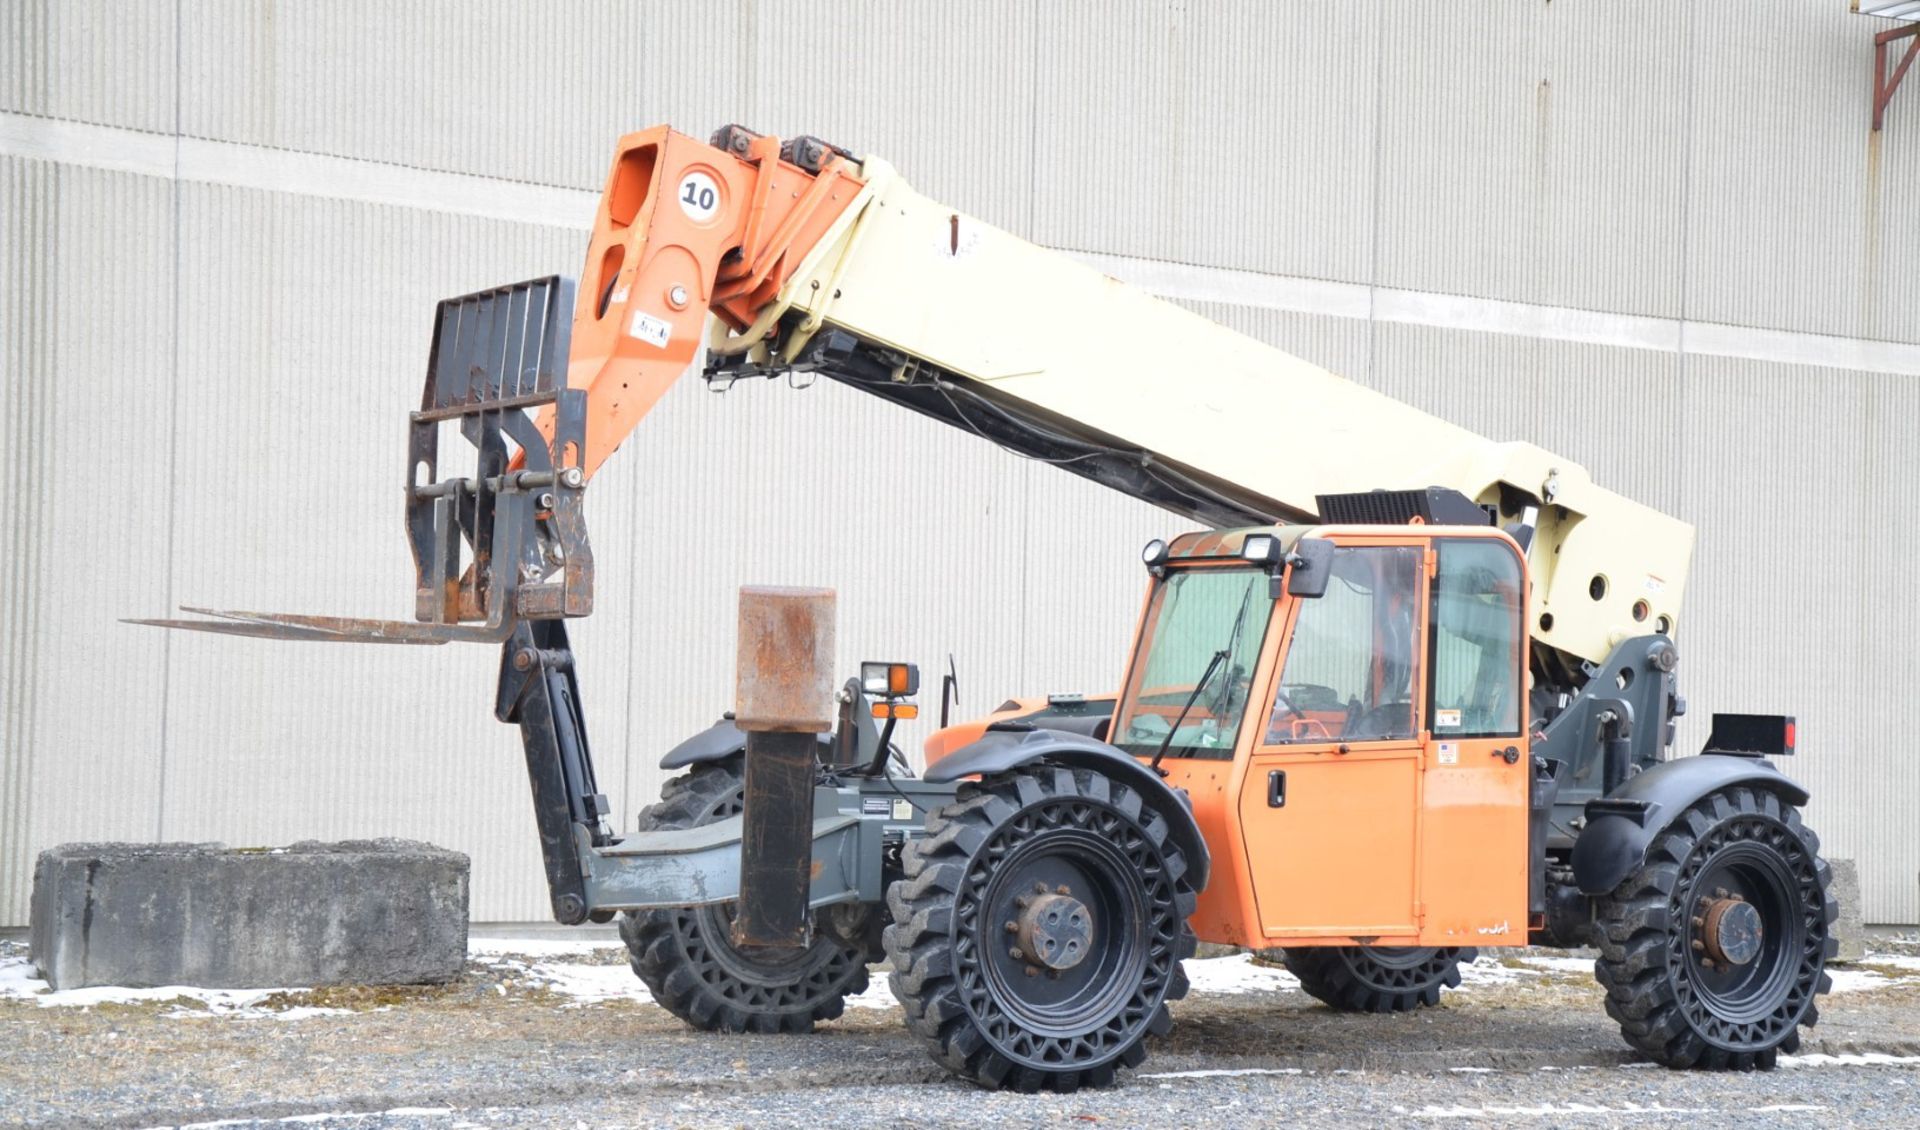 JLG (2011) G10-55A 10,000 LBS. CAPACITY DIESEL TELEHANDLER FORKLIFT WITH 56' MAX VERTICAL LIFT, - Image 2 of 23